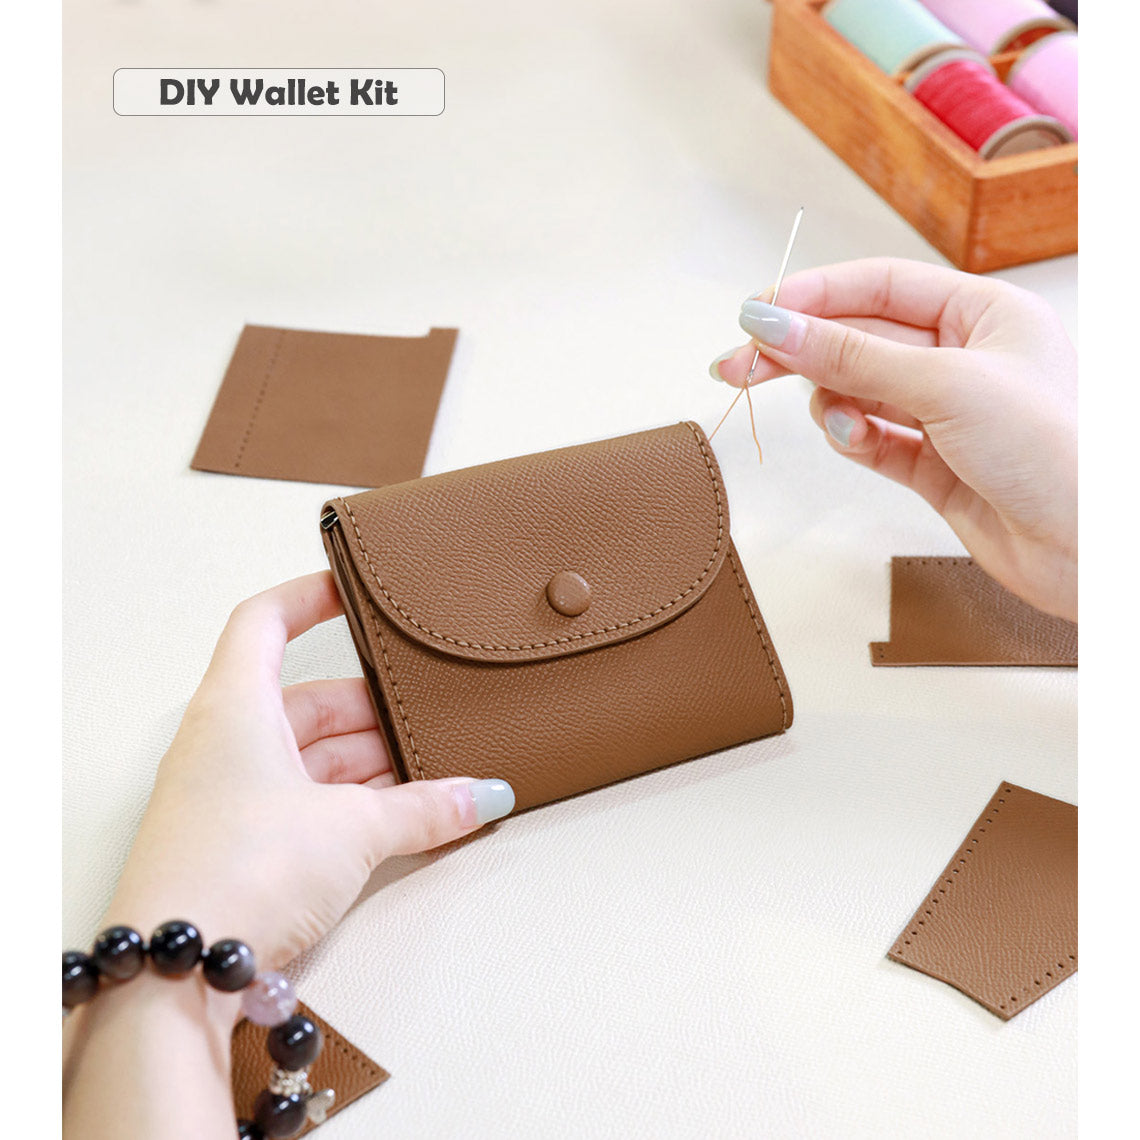 POPSEWING® Top Grain Leather Compact Coin Purse DIY Kits